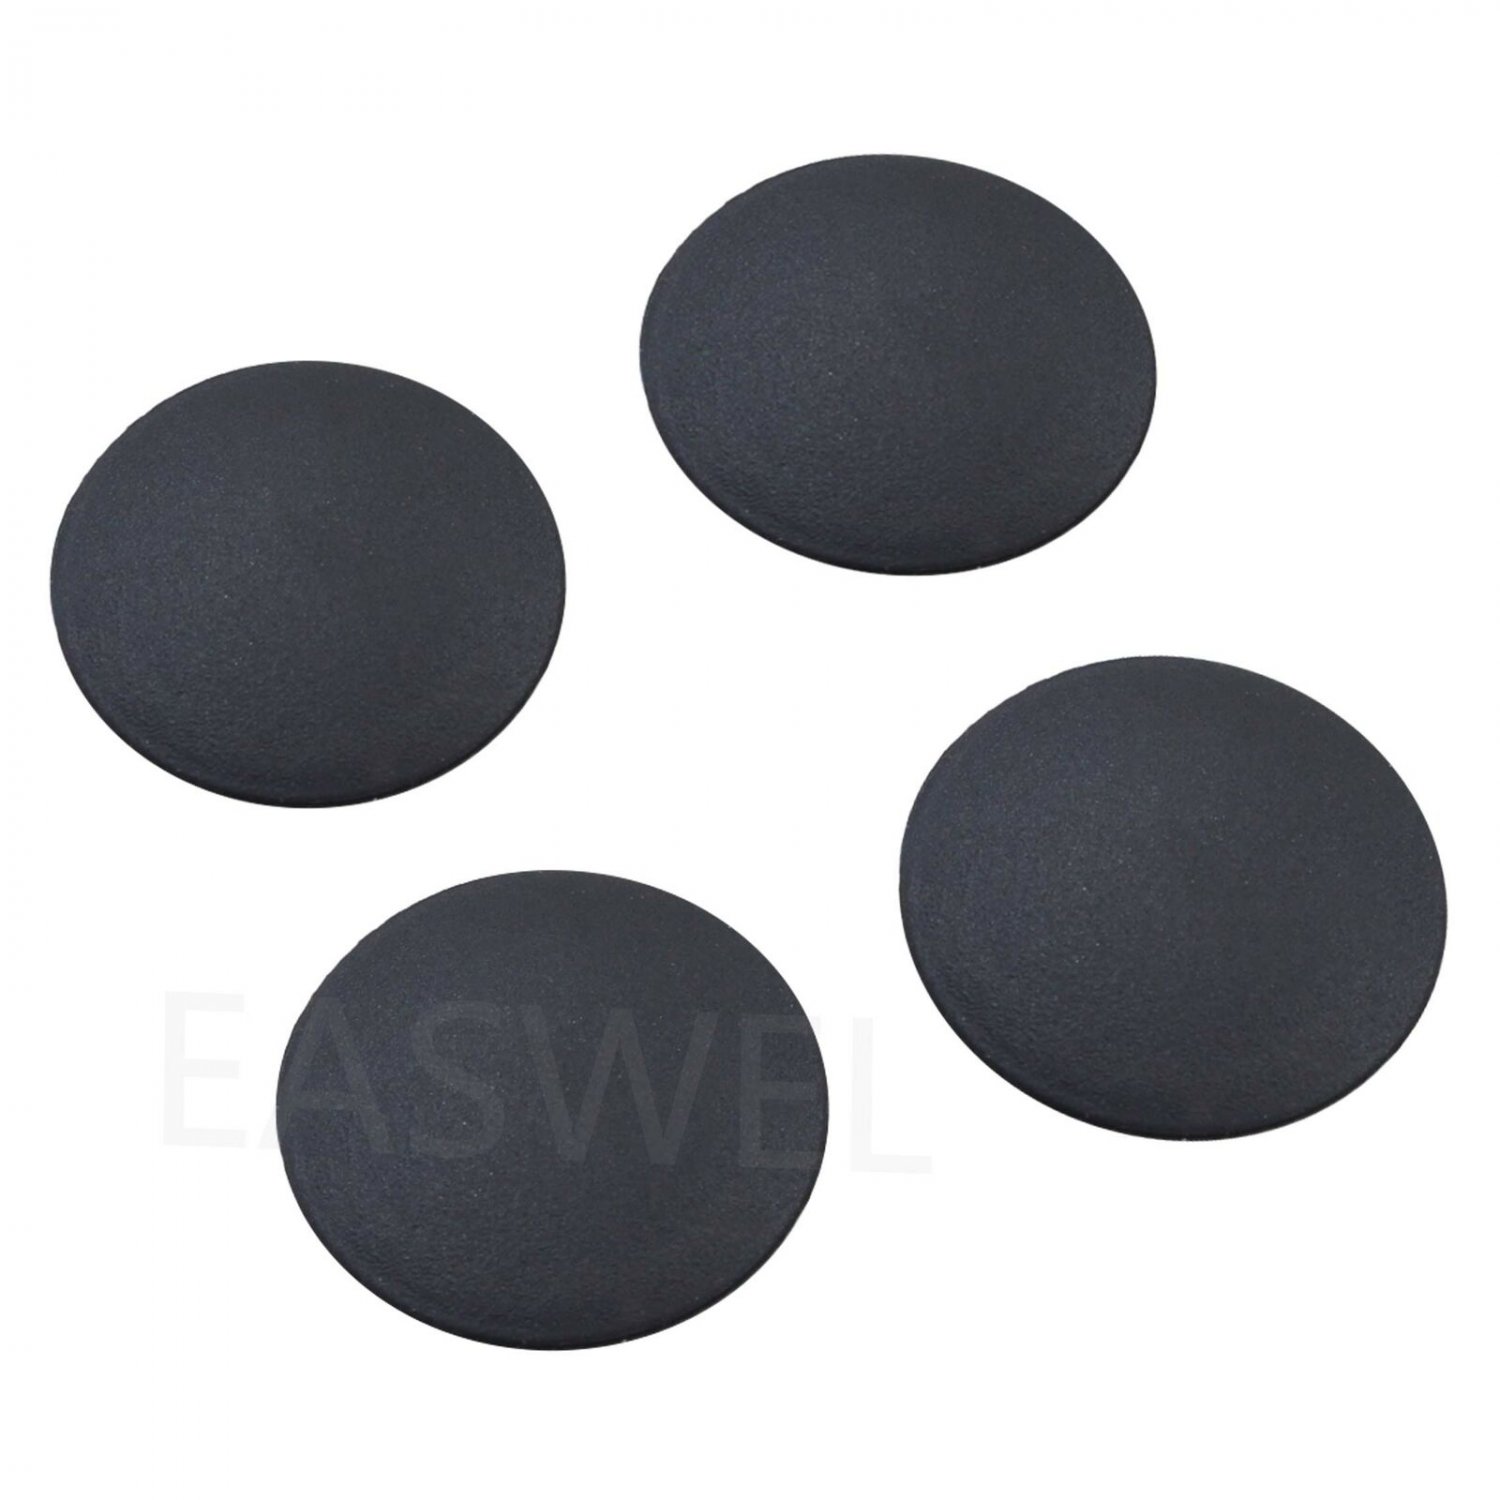 Replacement Rubber Feet 4PC For Apple Macbook Pro A1278 A1286 A1297 13" 15" 17"